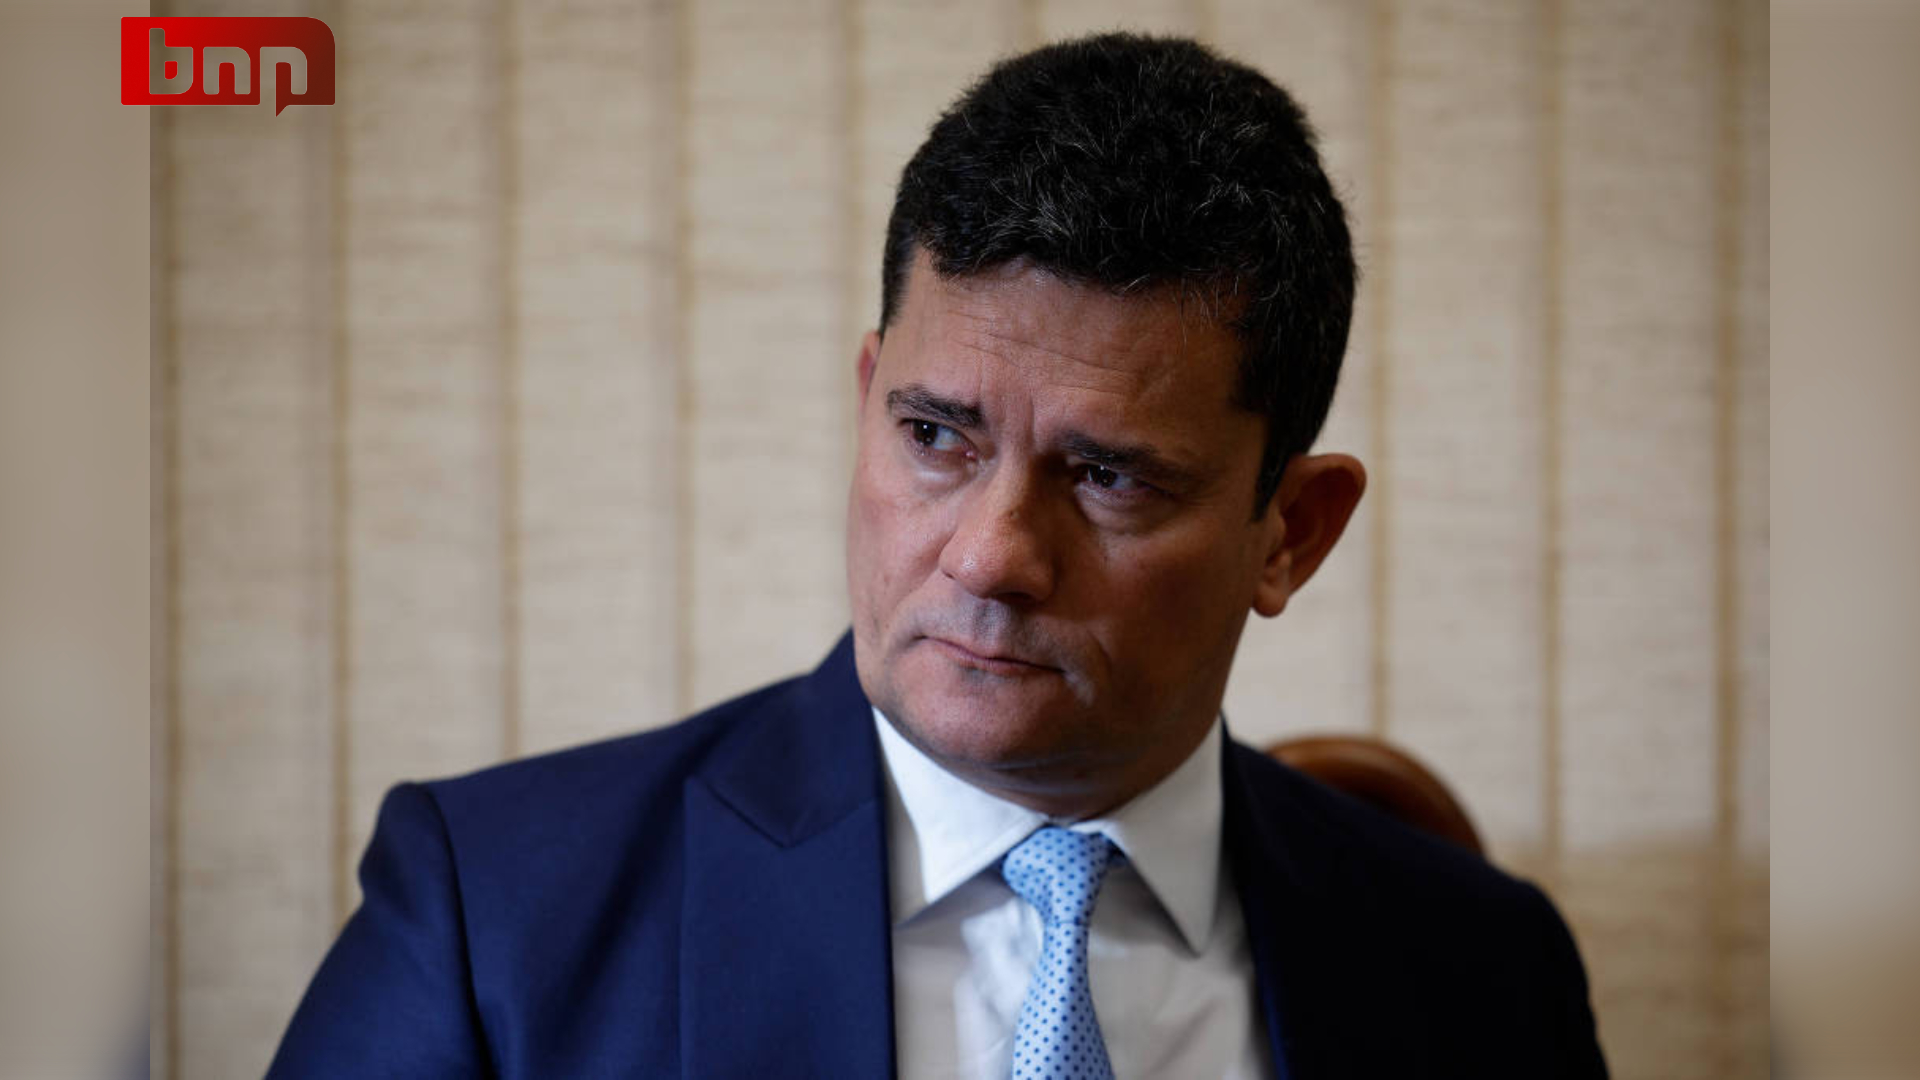 Federal Police Thwart PCC's Attack Plan on Public Officials, Including Senator Sergio Moro - BNN Breaking